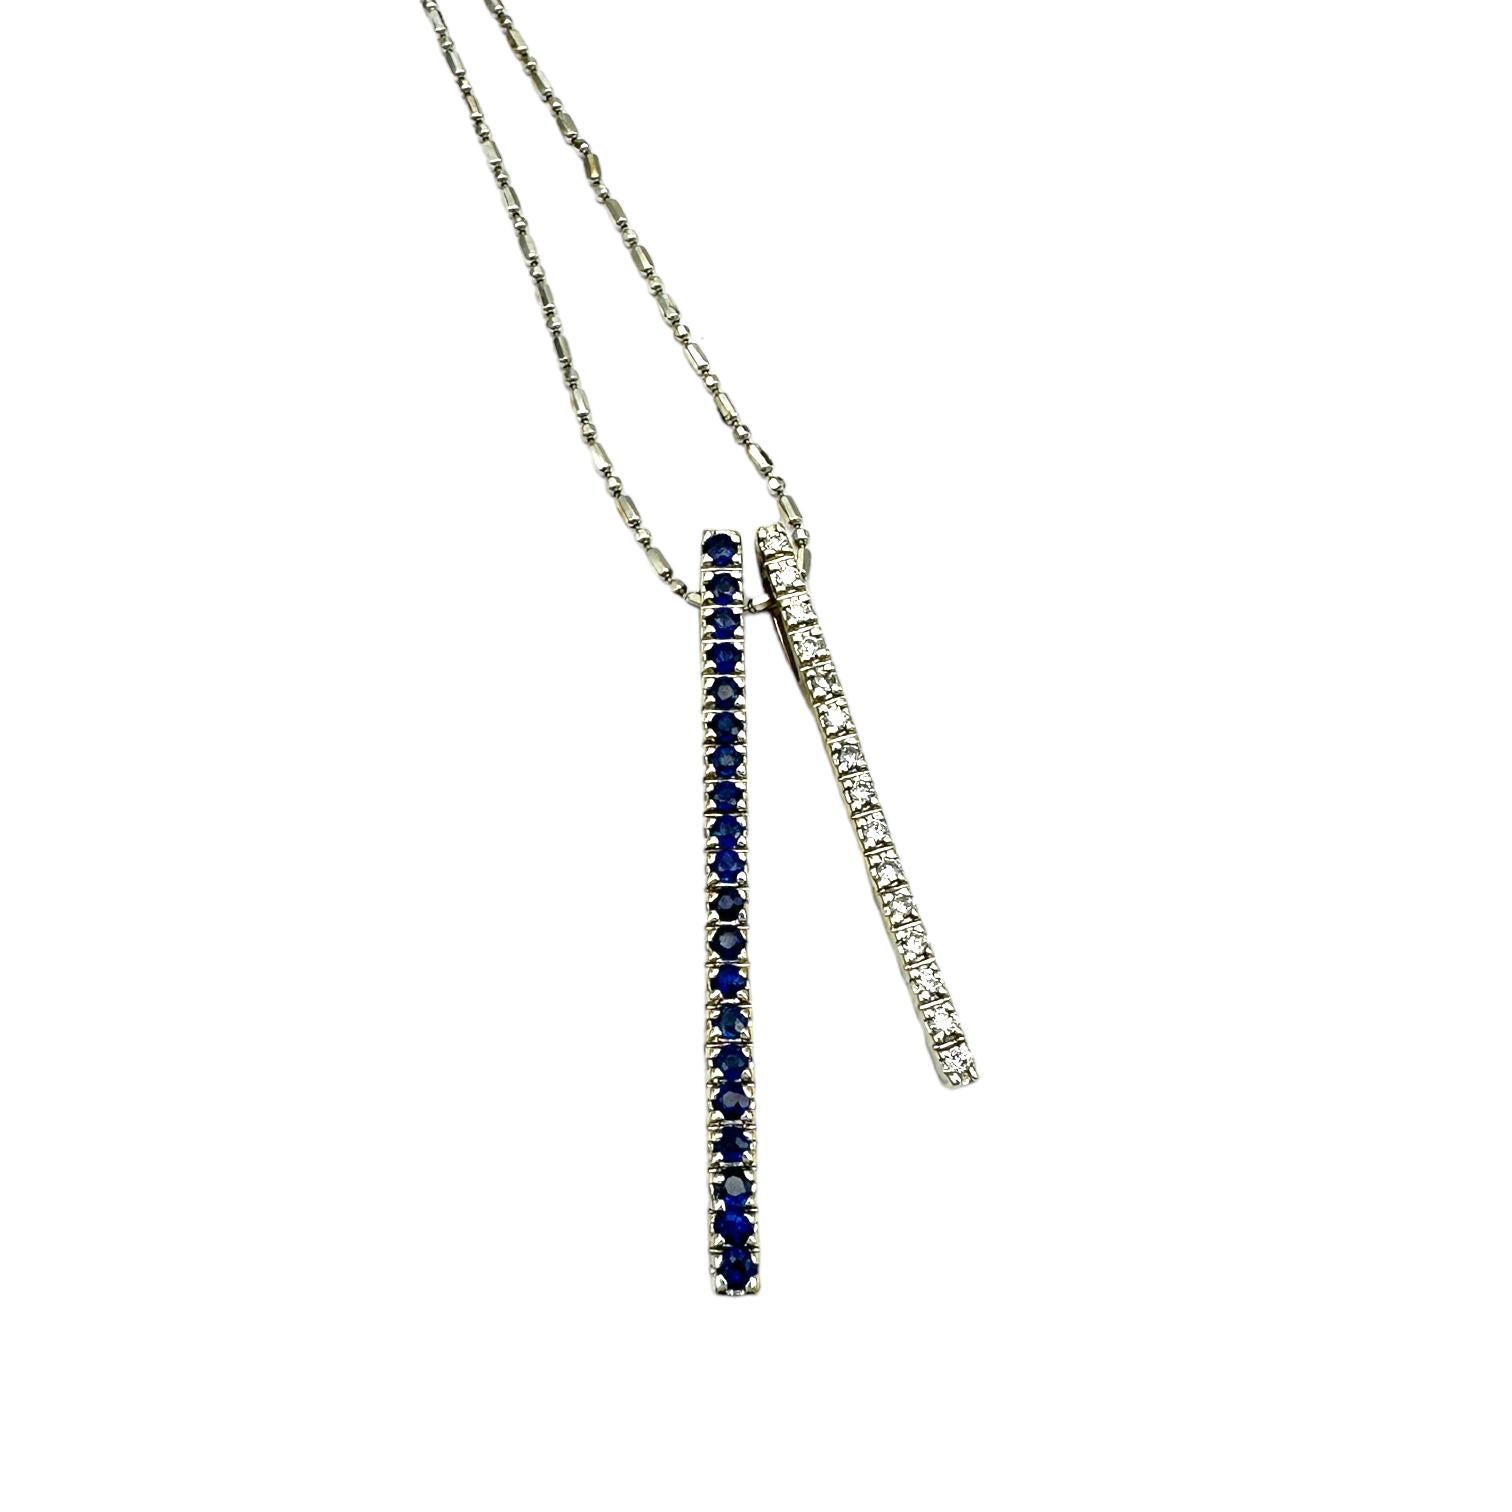 14 Karat white gold diamond pendant and earrings set in a double bar, pave setting. The two bars are set with sapphires and the other with diamonds ranging from 1.50 to 2 inches.
Approximately 85 sapphires and diamonds average 1.80-1.50 mm, having a